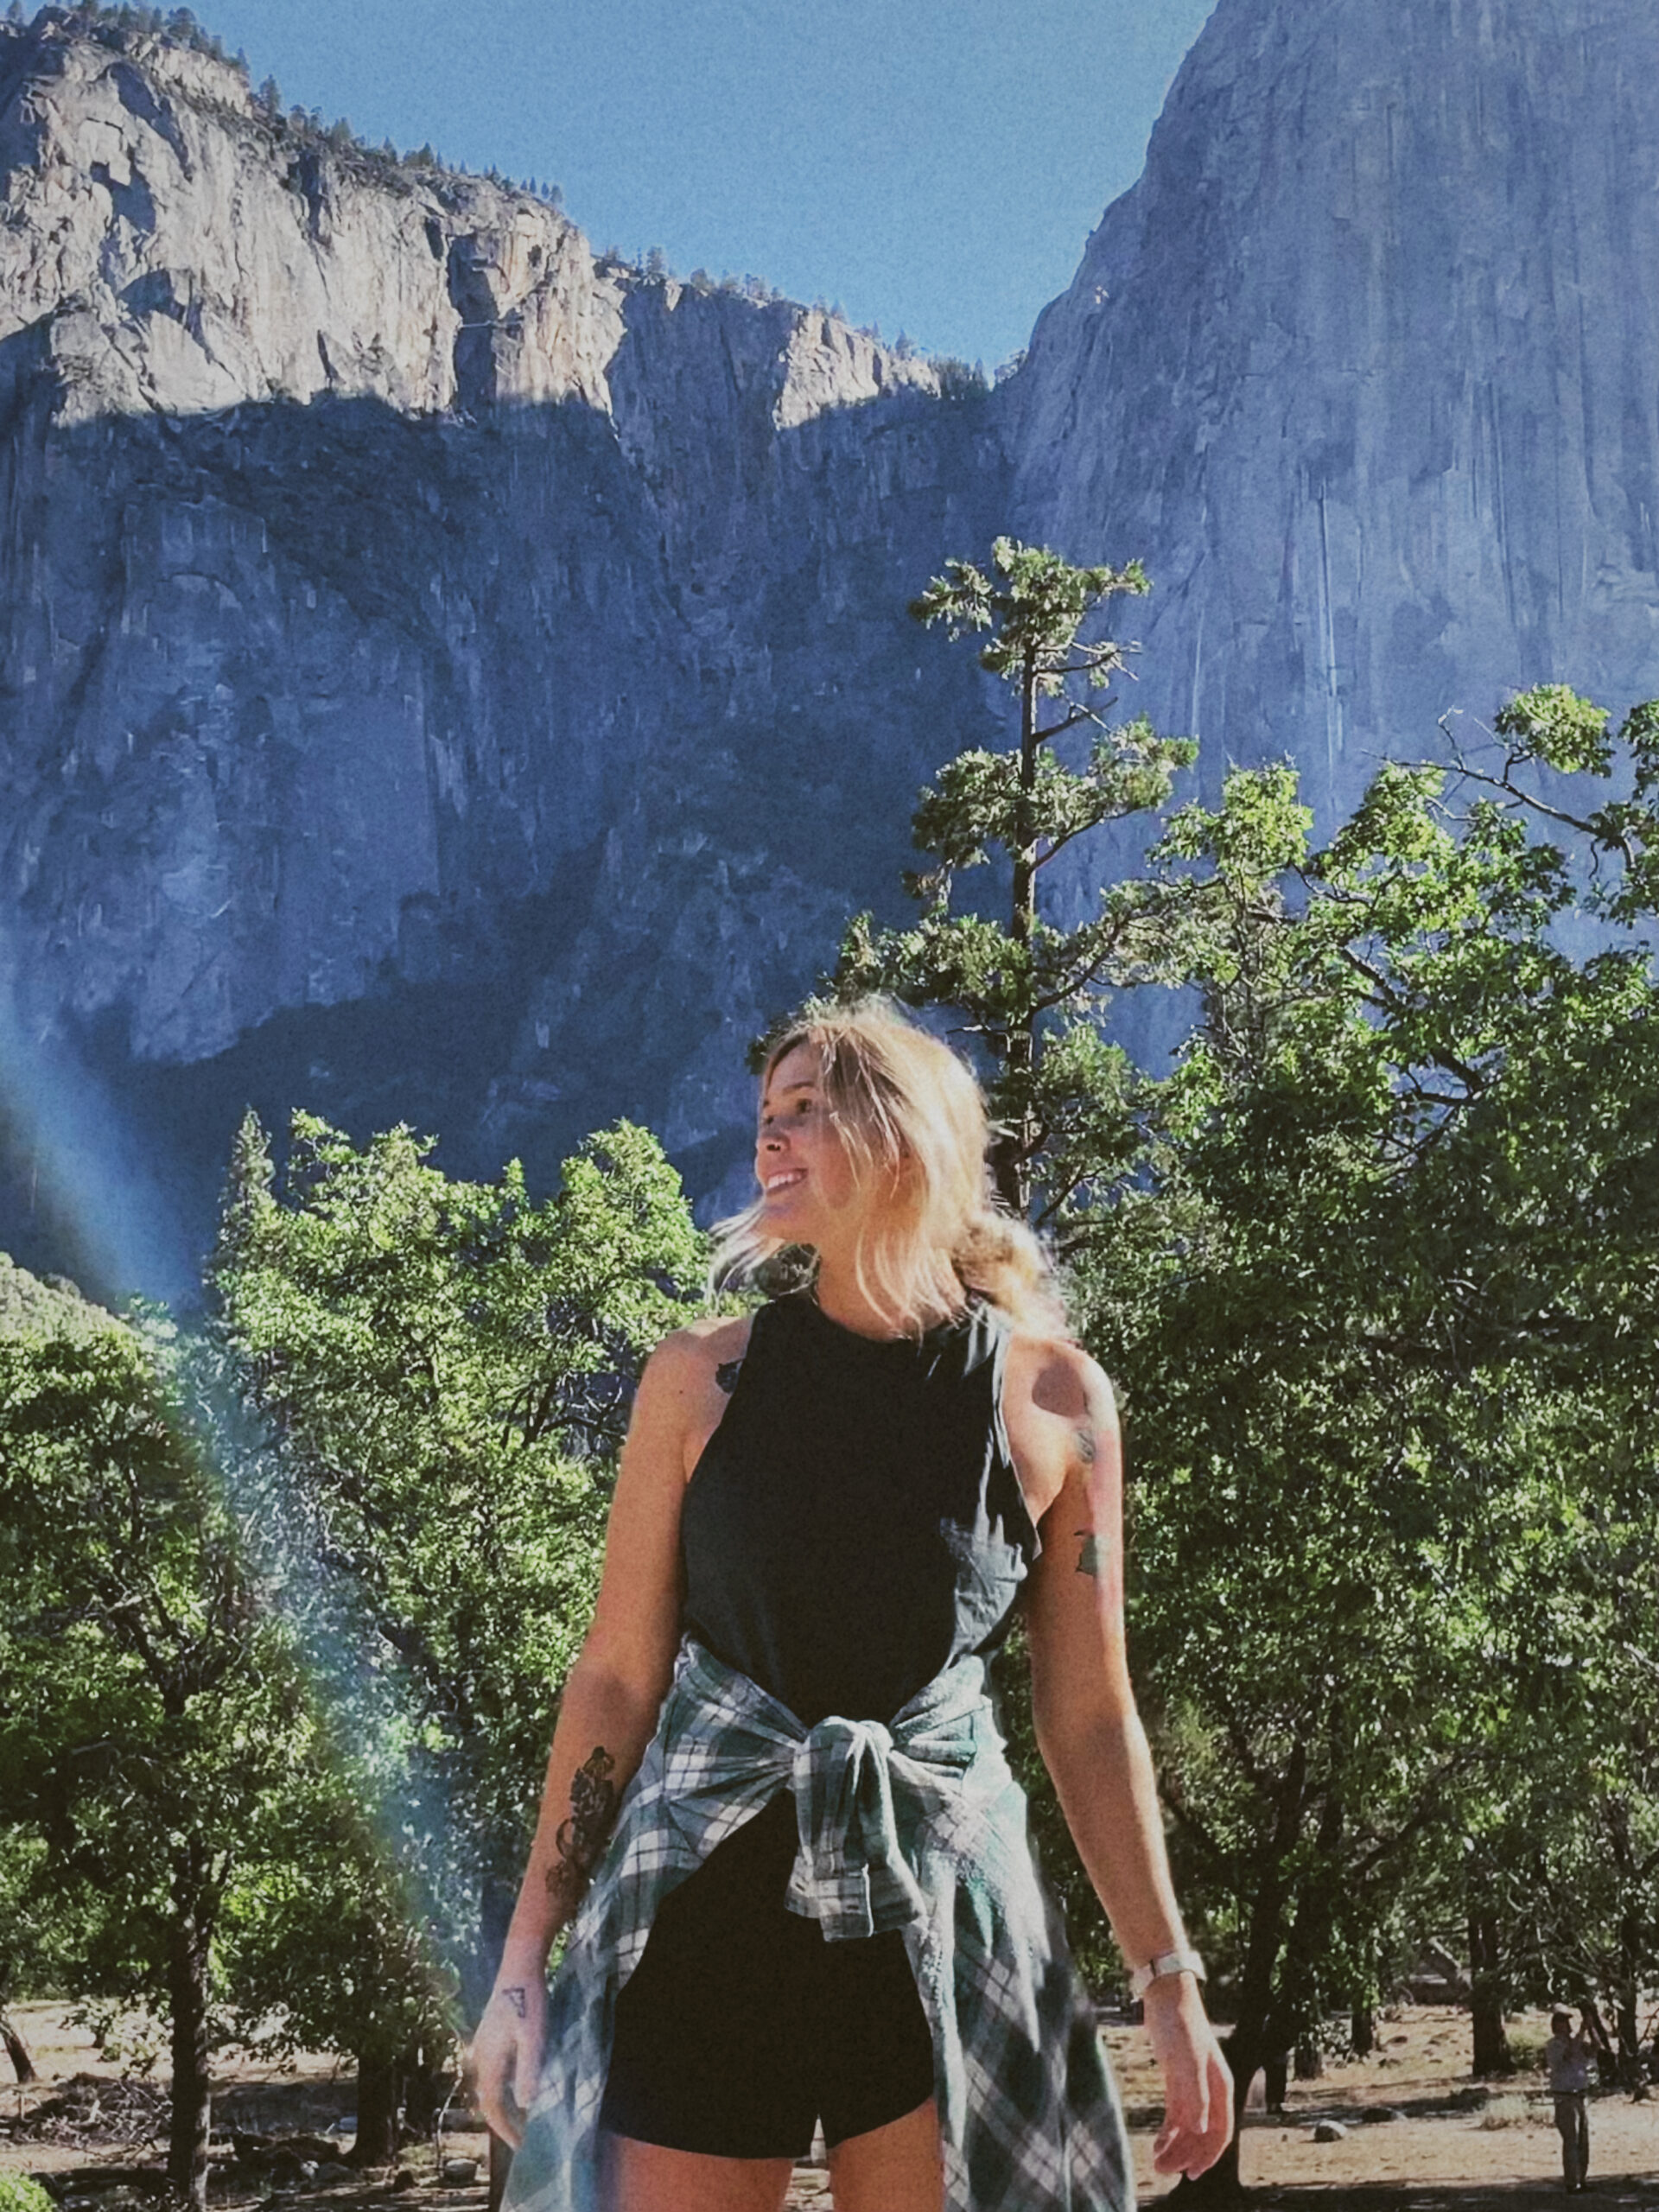 Girl at yosemite, staying healthy while travelling